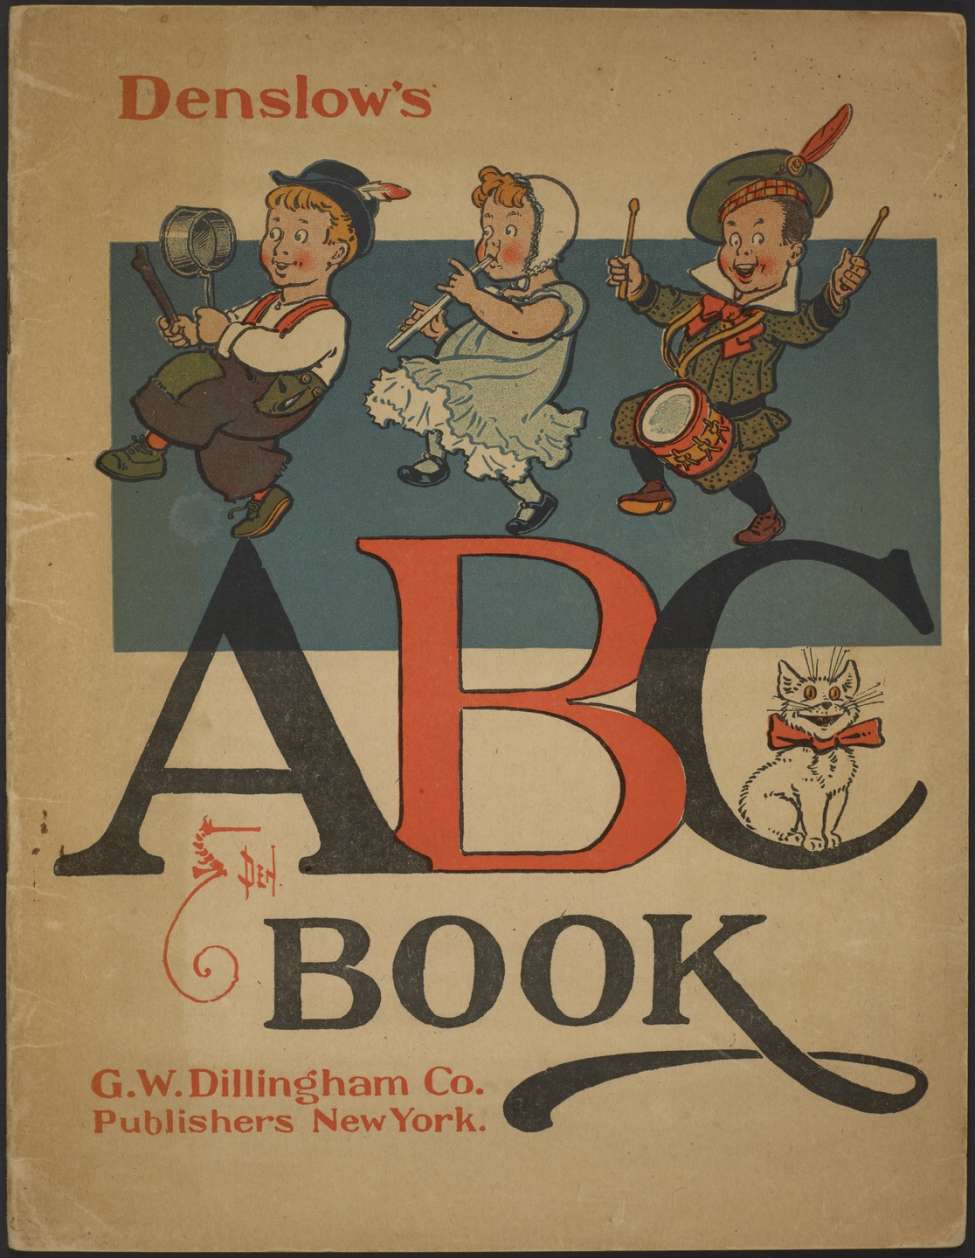 Book Cover For Denslow's ABC Book